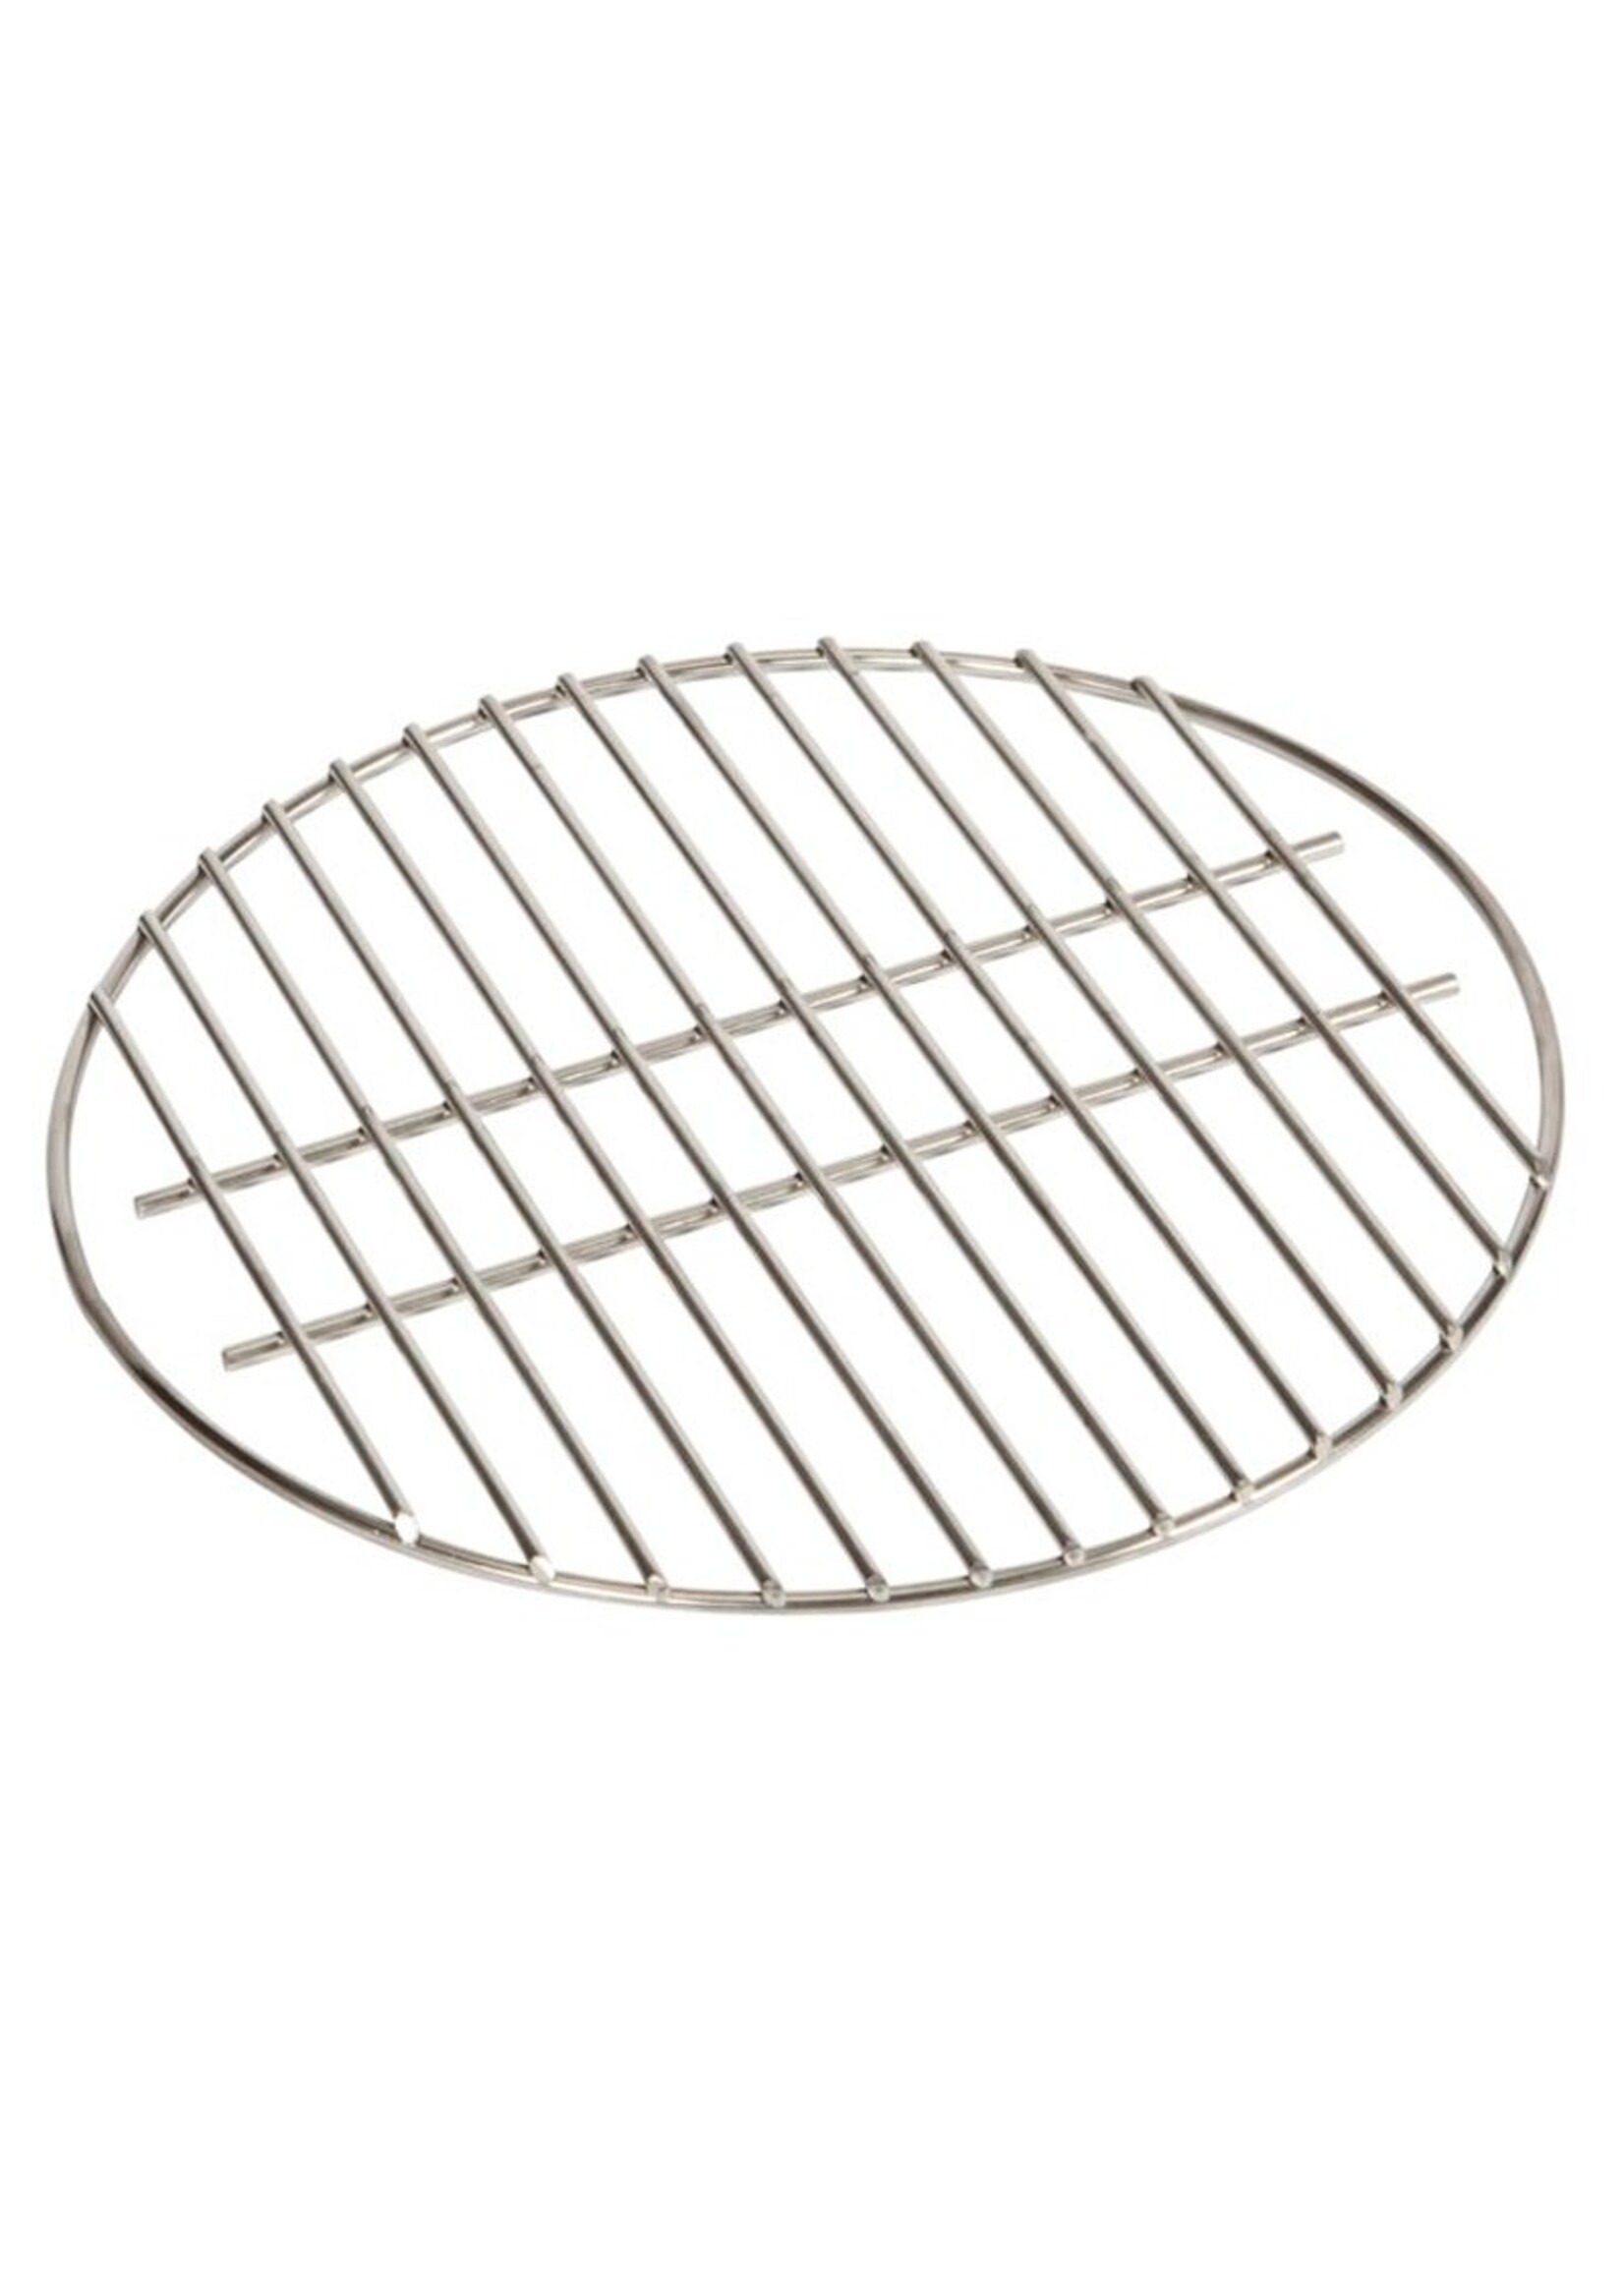 Big Green Egg BGE 24in Stainless Steel Grid - XL